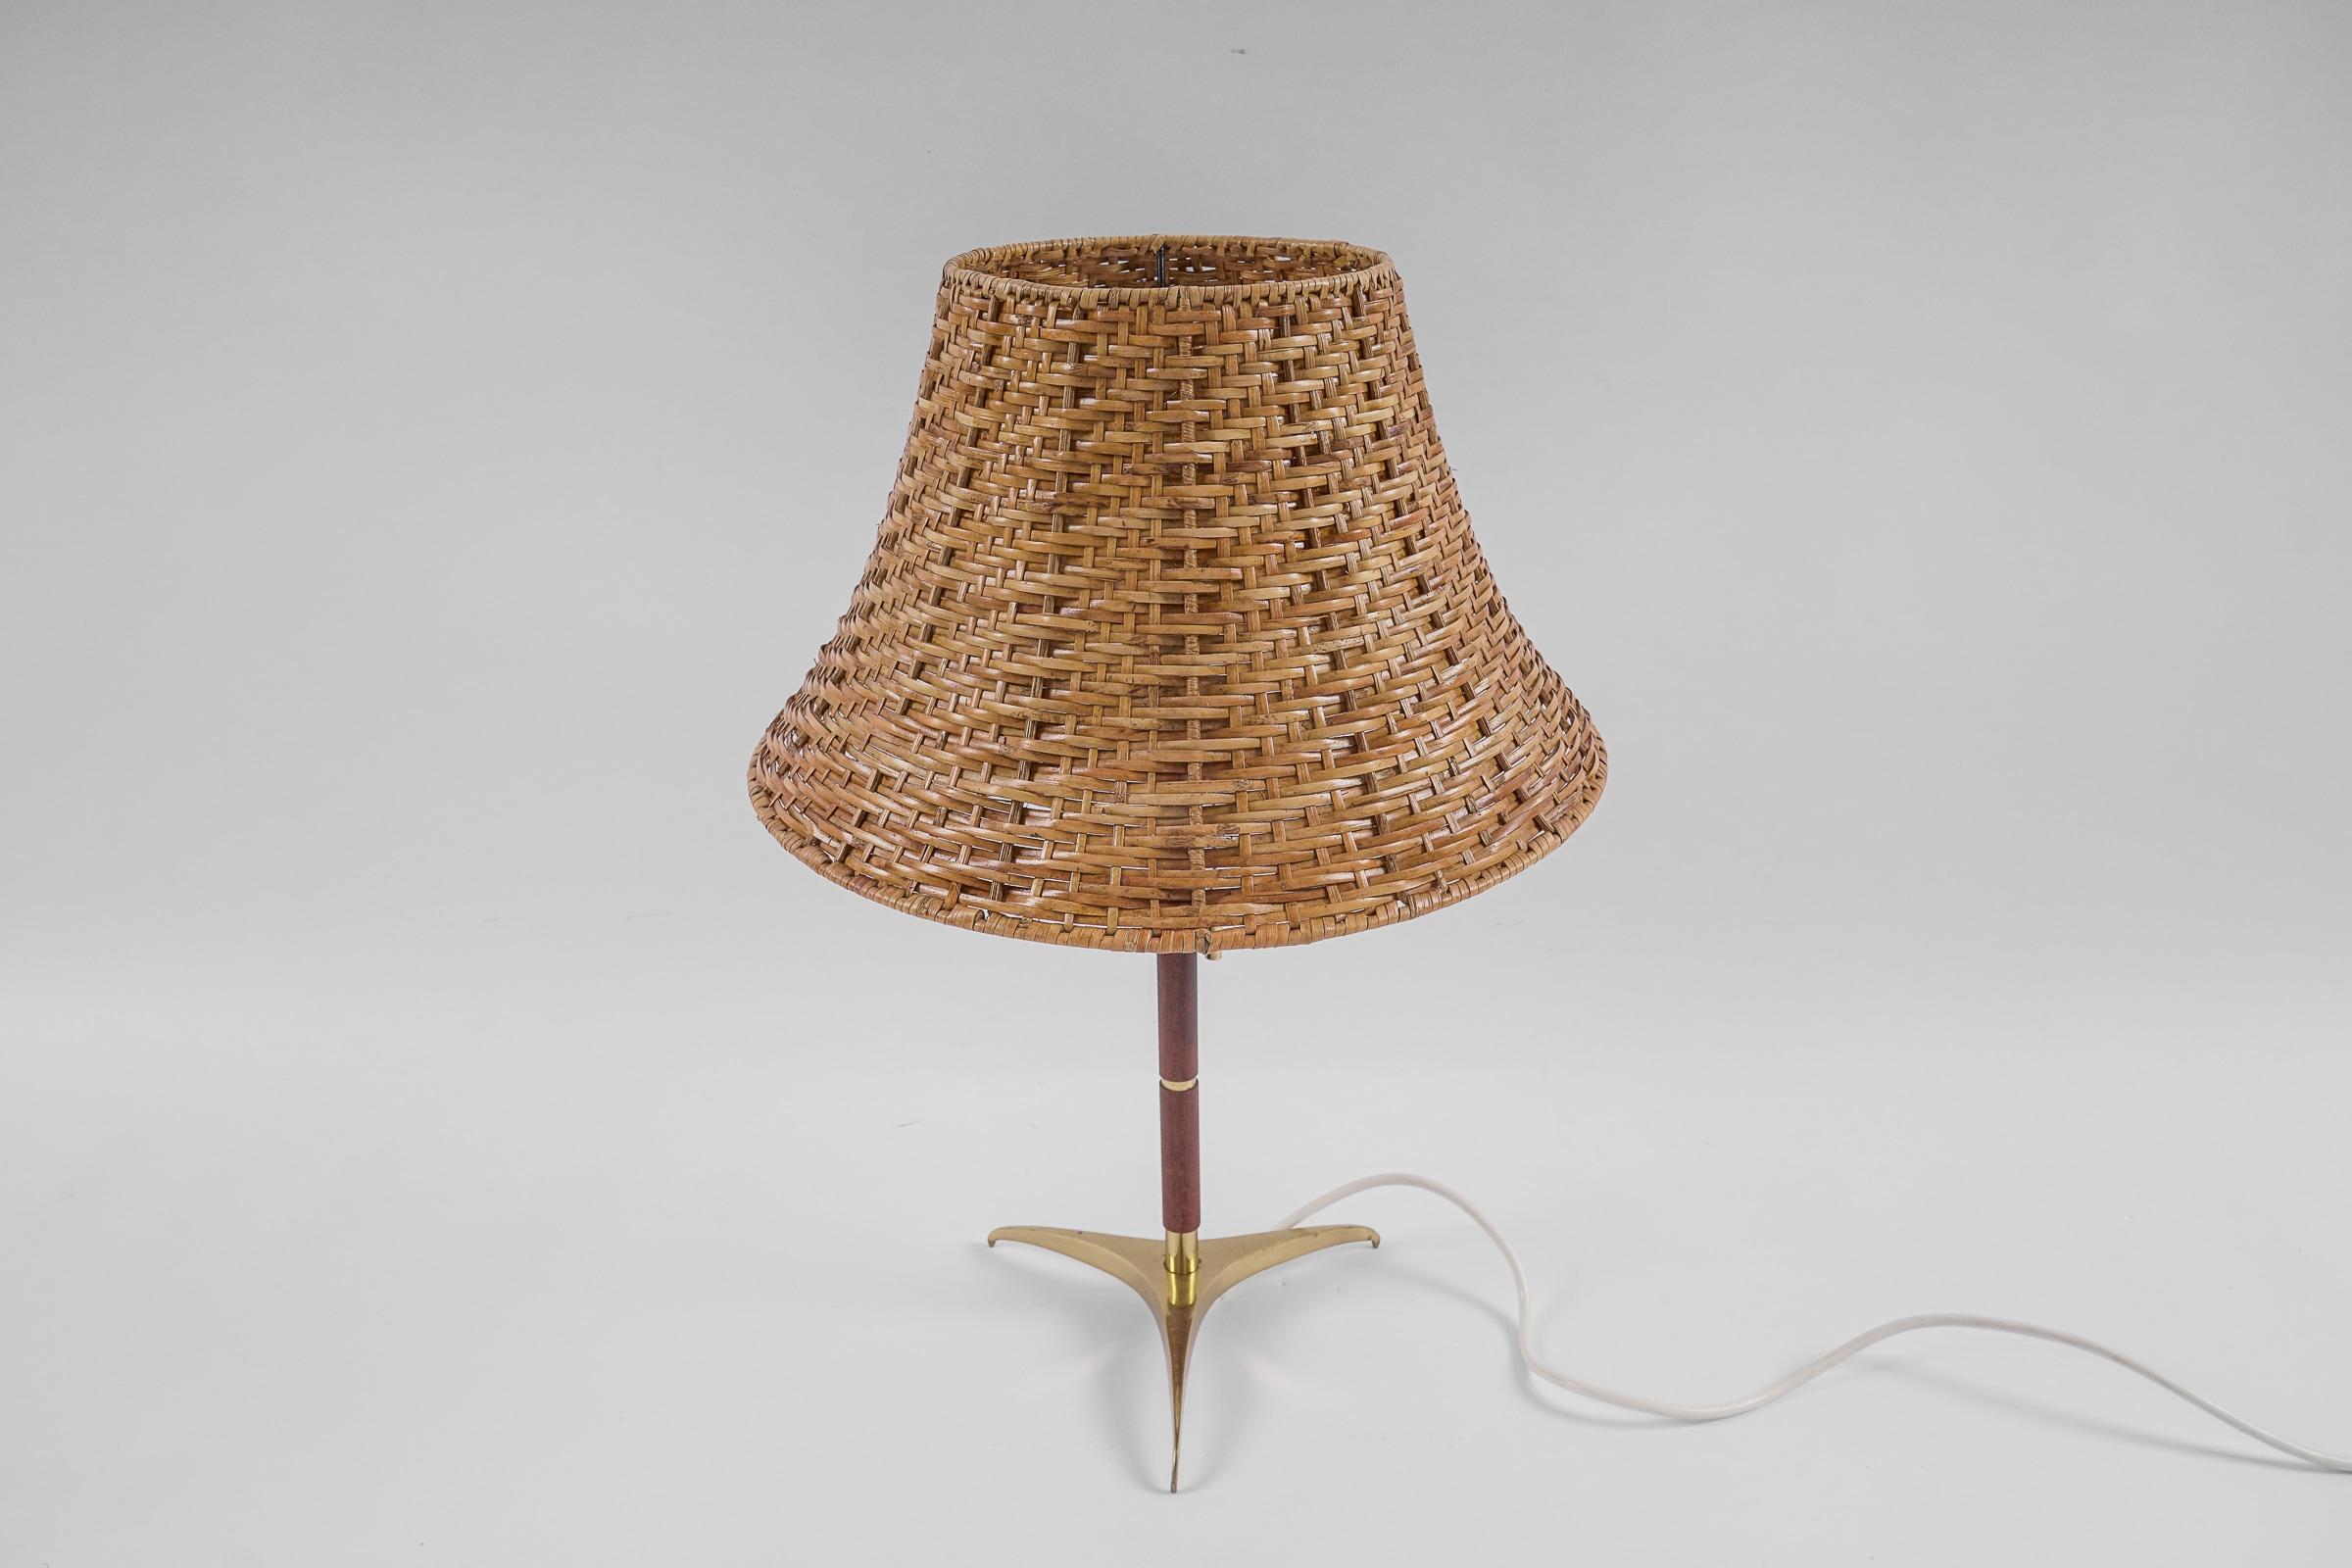 Mid-20th Century Lovely Mid-Century Modern Table Lamp in Brass, Wicker and Teak, 1950s, Austria For Sale